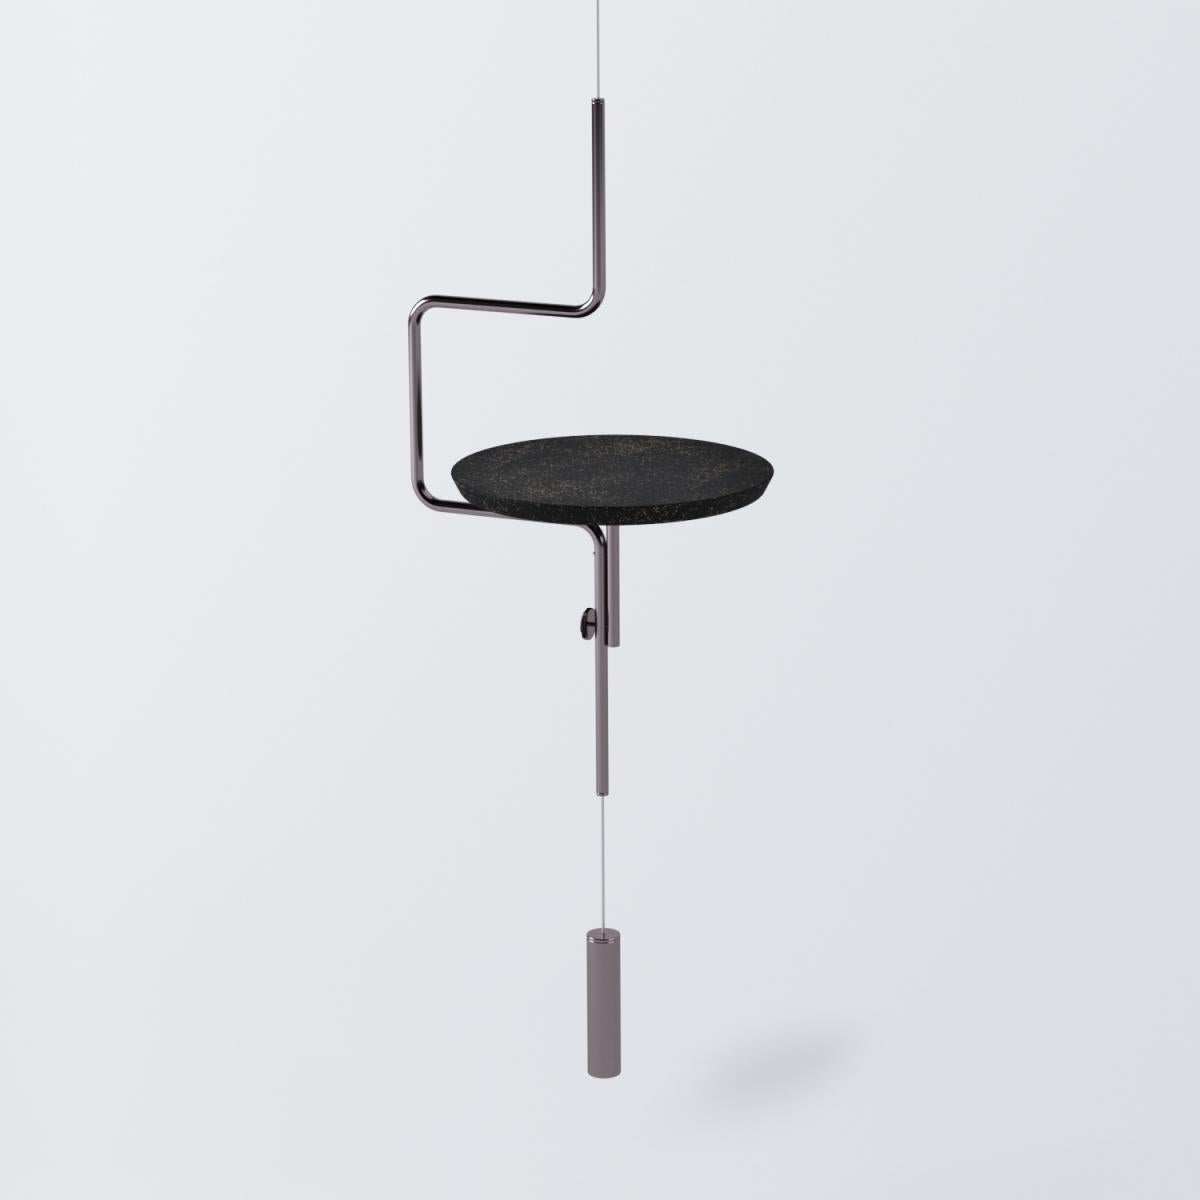 record hanging table
The disco suspended table proposes a new vision for side tables, with the fixation on the ceiling its stability is due to the counterweight of the base that is completely suspended. The height of the top can be adjusted using